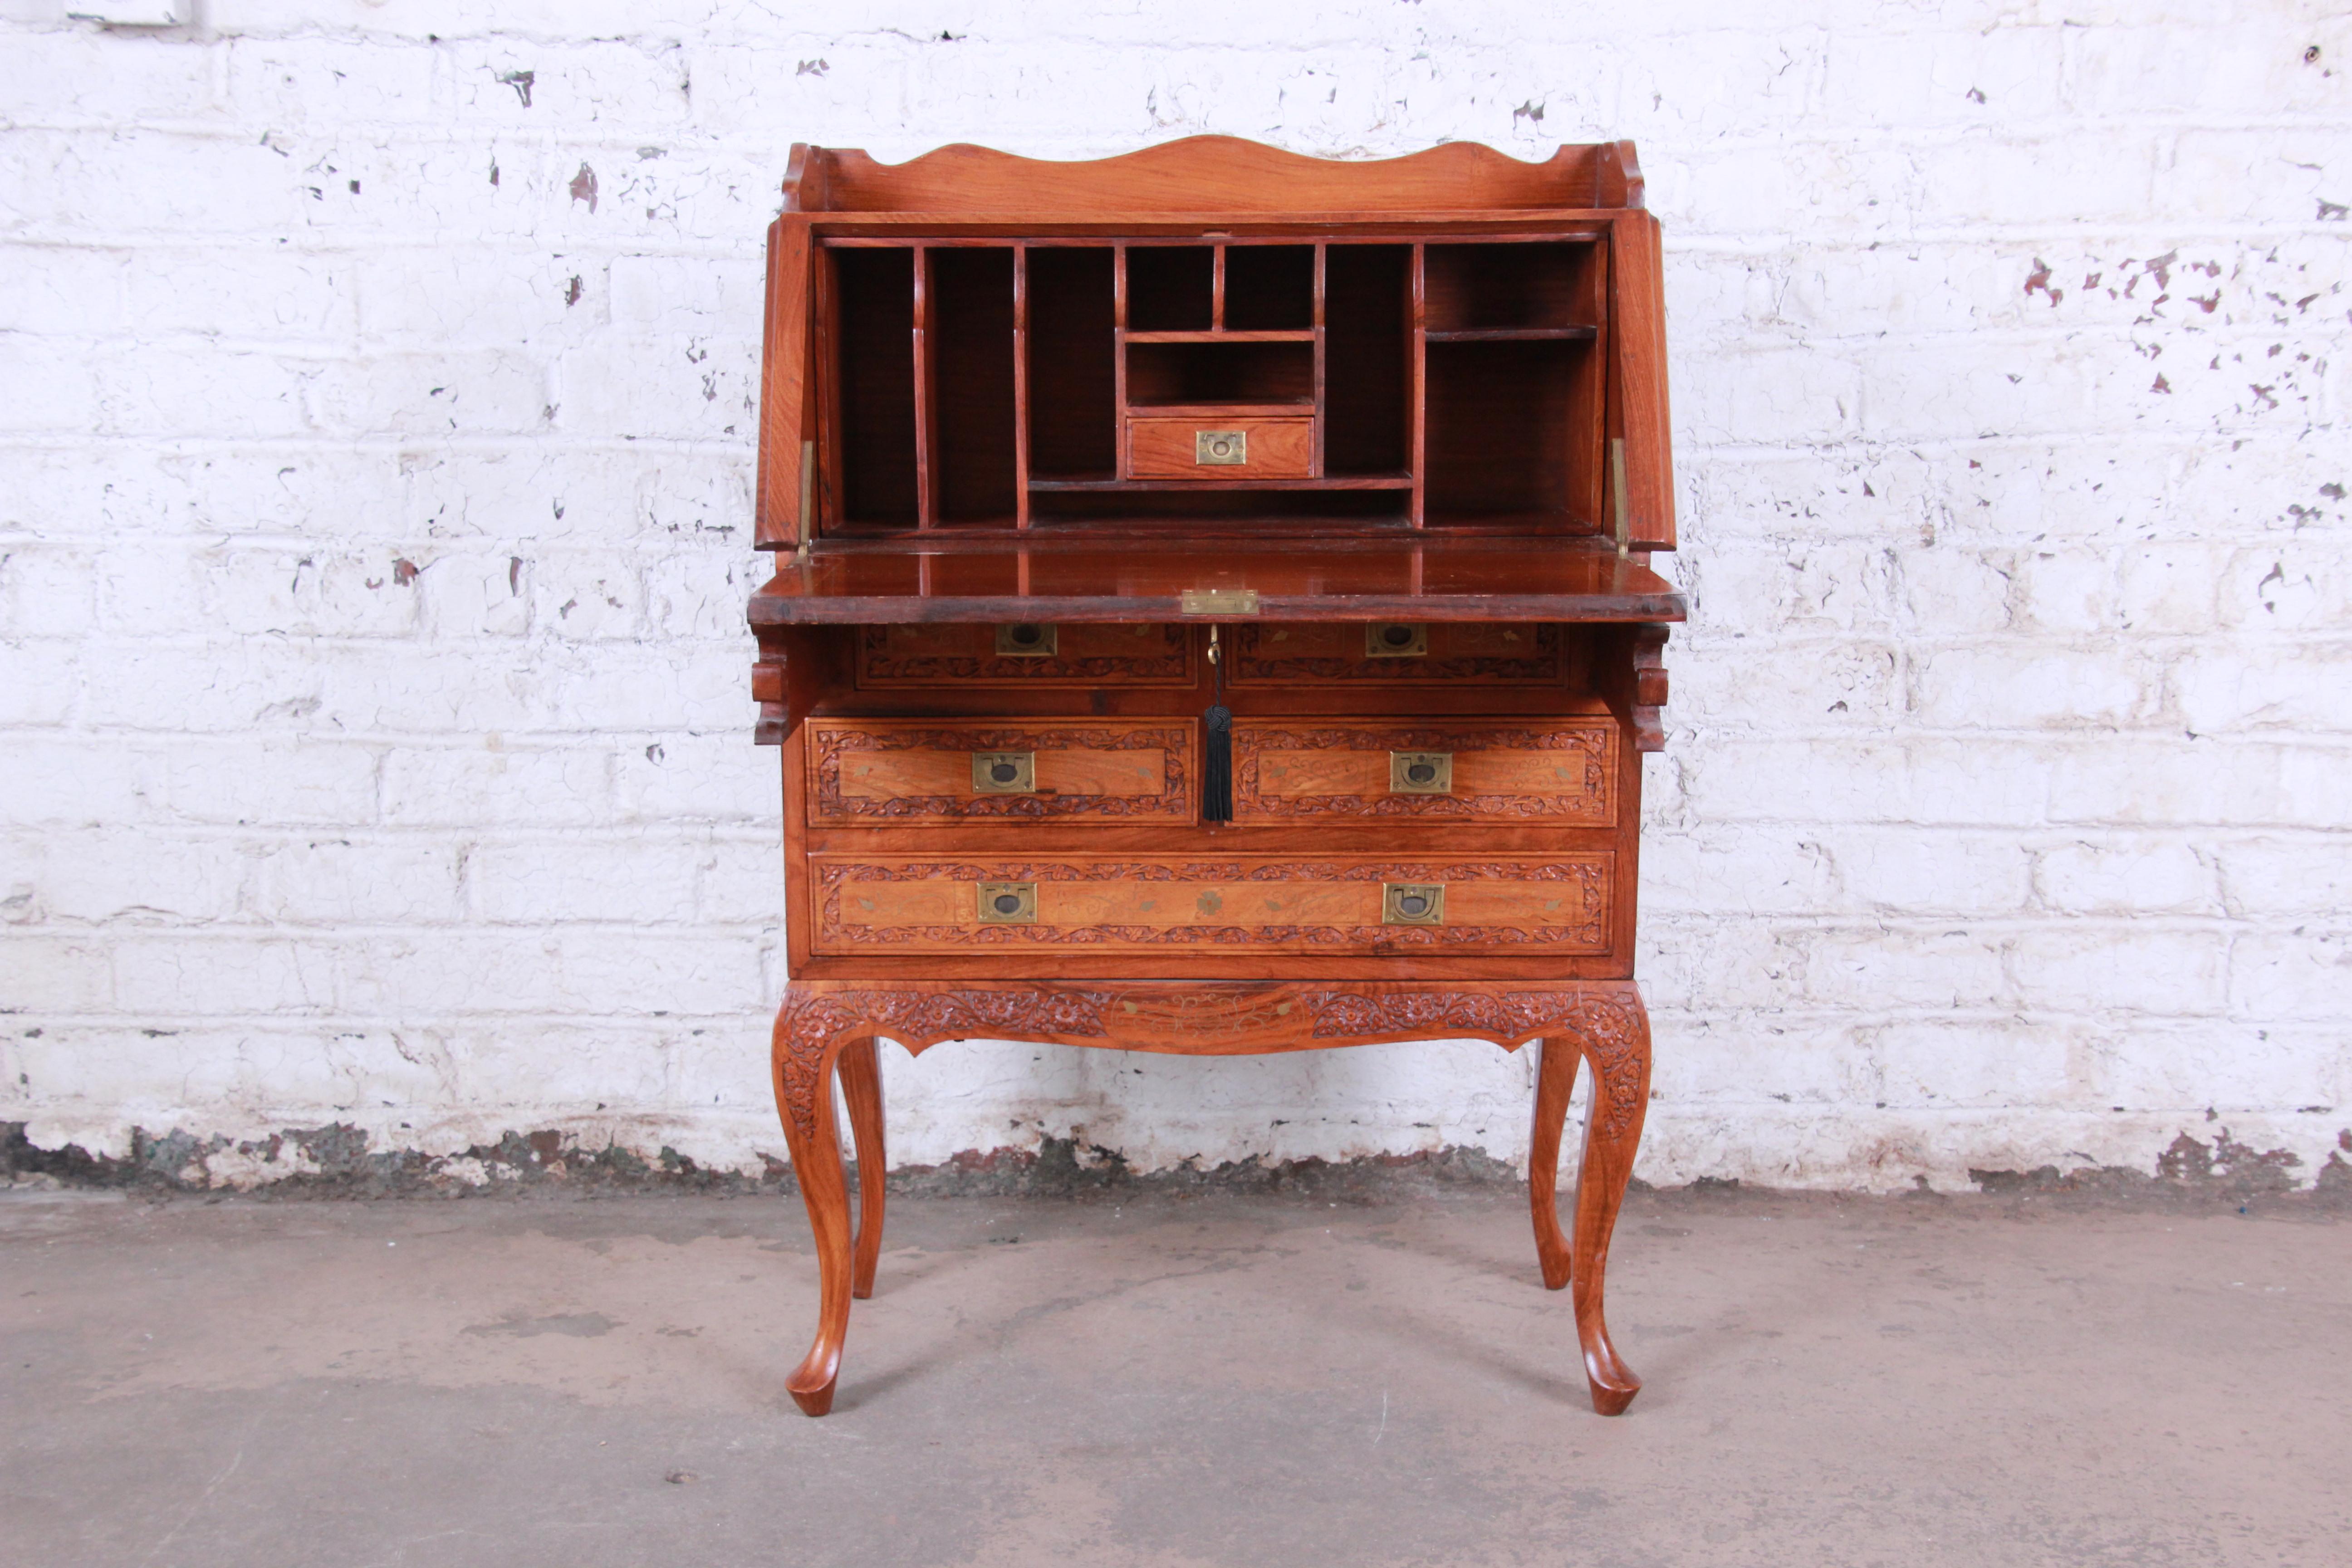 20th Century Ornate Carved Elm Wood and Brass Inlay Chinoiserie Drop Front Secretary Desk